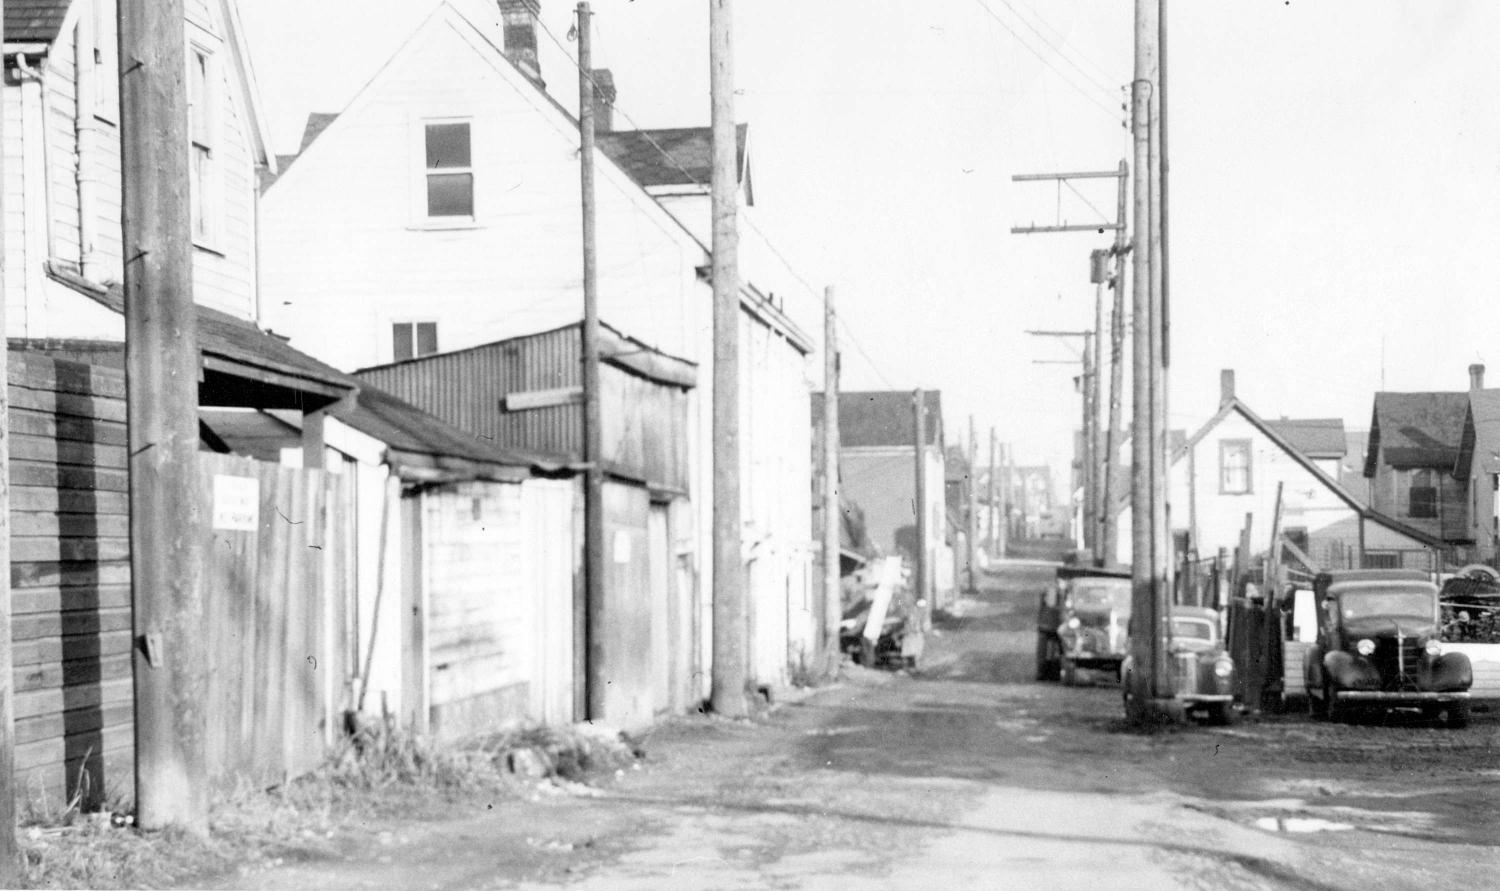 1958 View of Hogan's Alley, cars and trucks parked in alley.